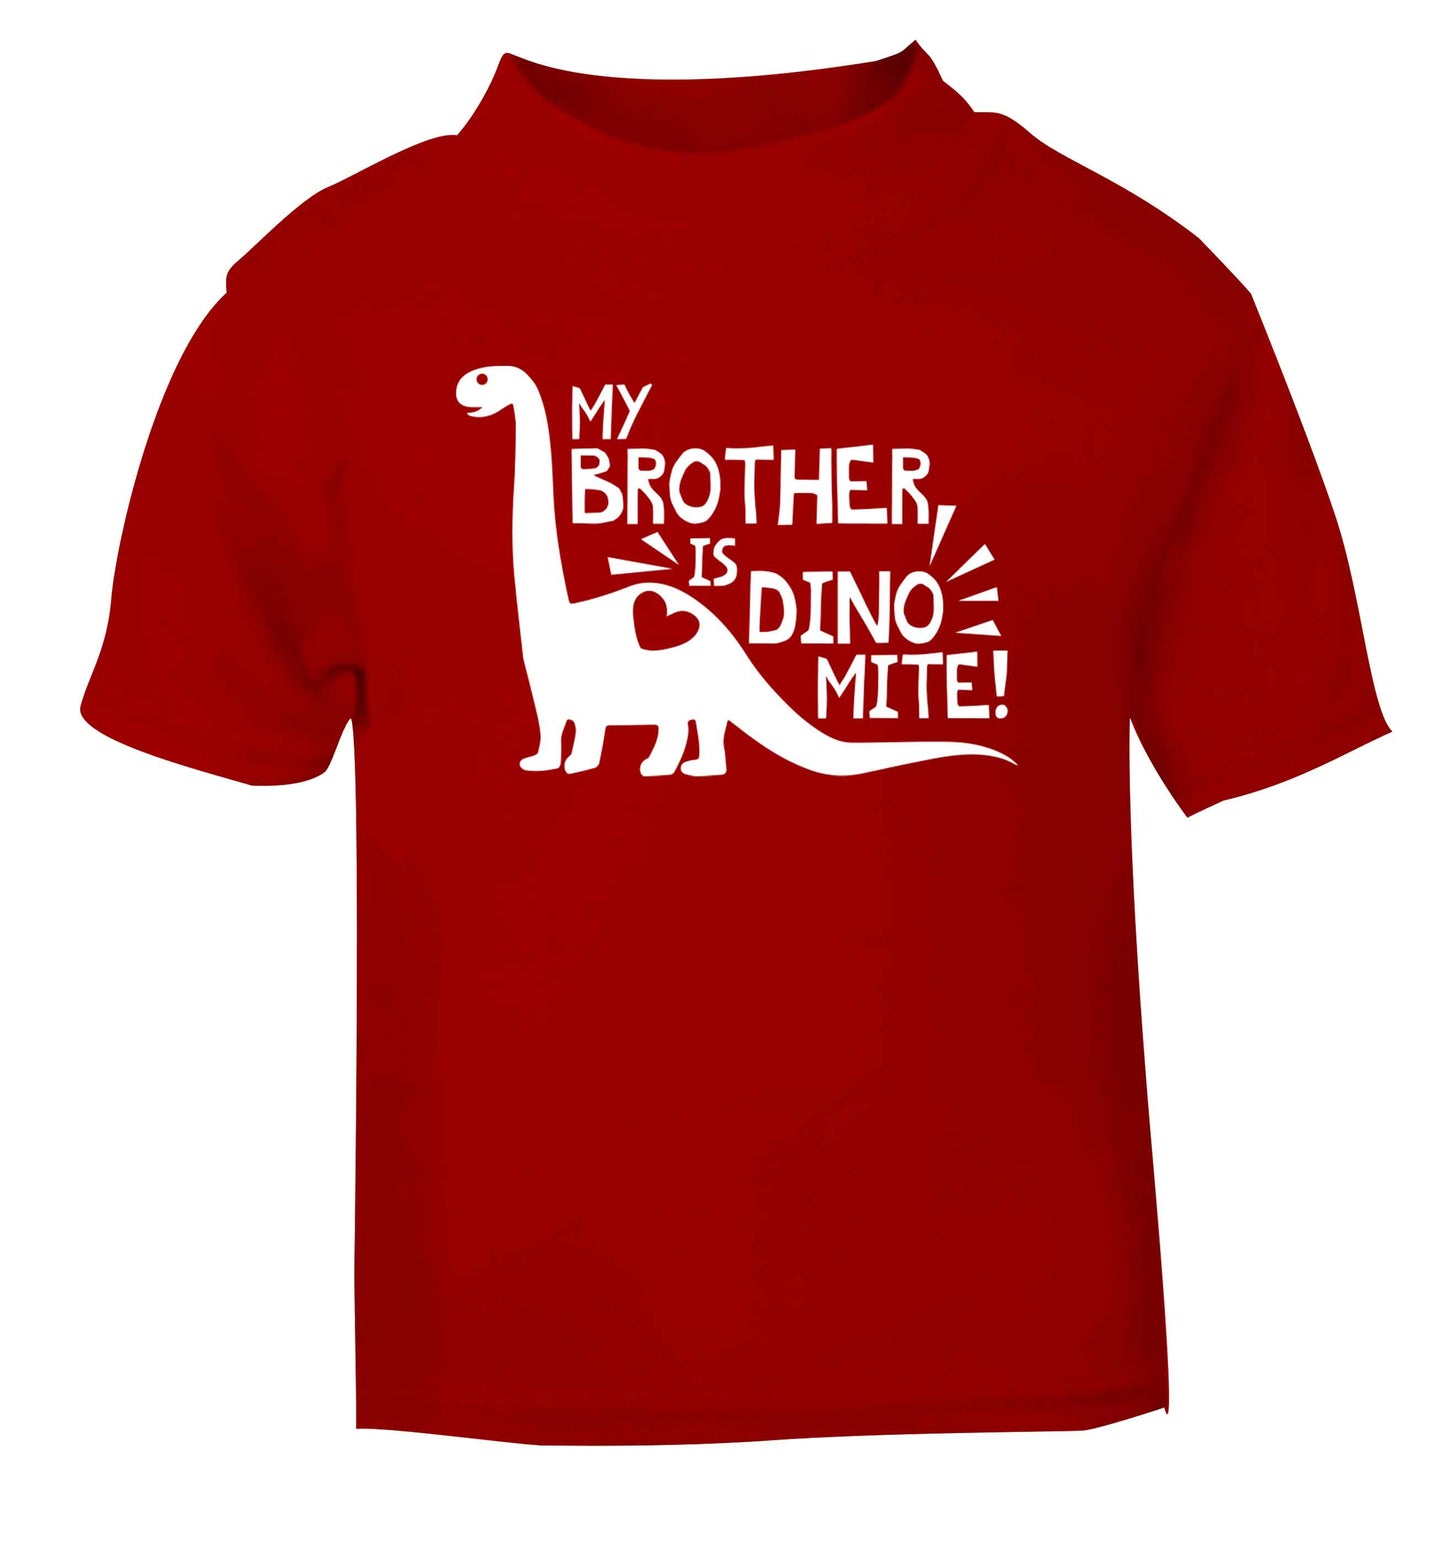 My brother is dinomite! red Baby Toddler Tshirt 2 Years